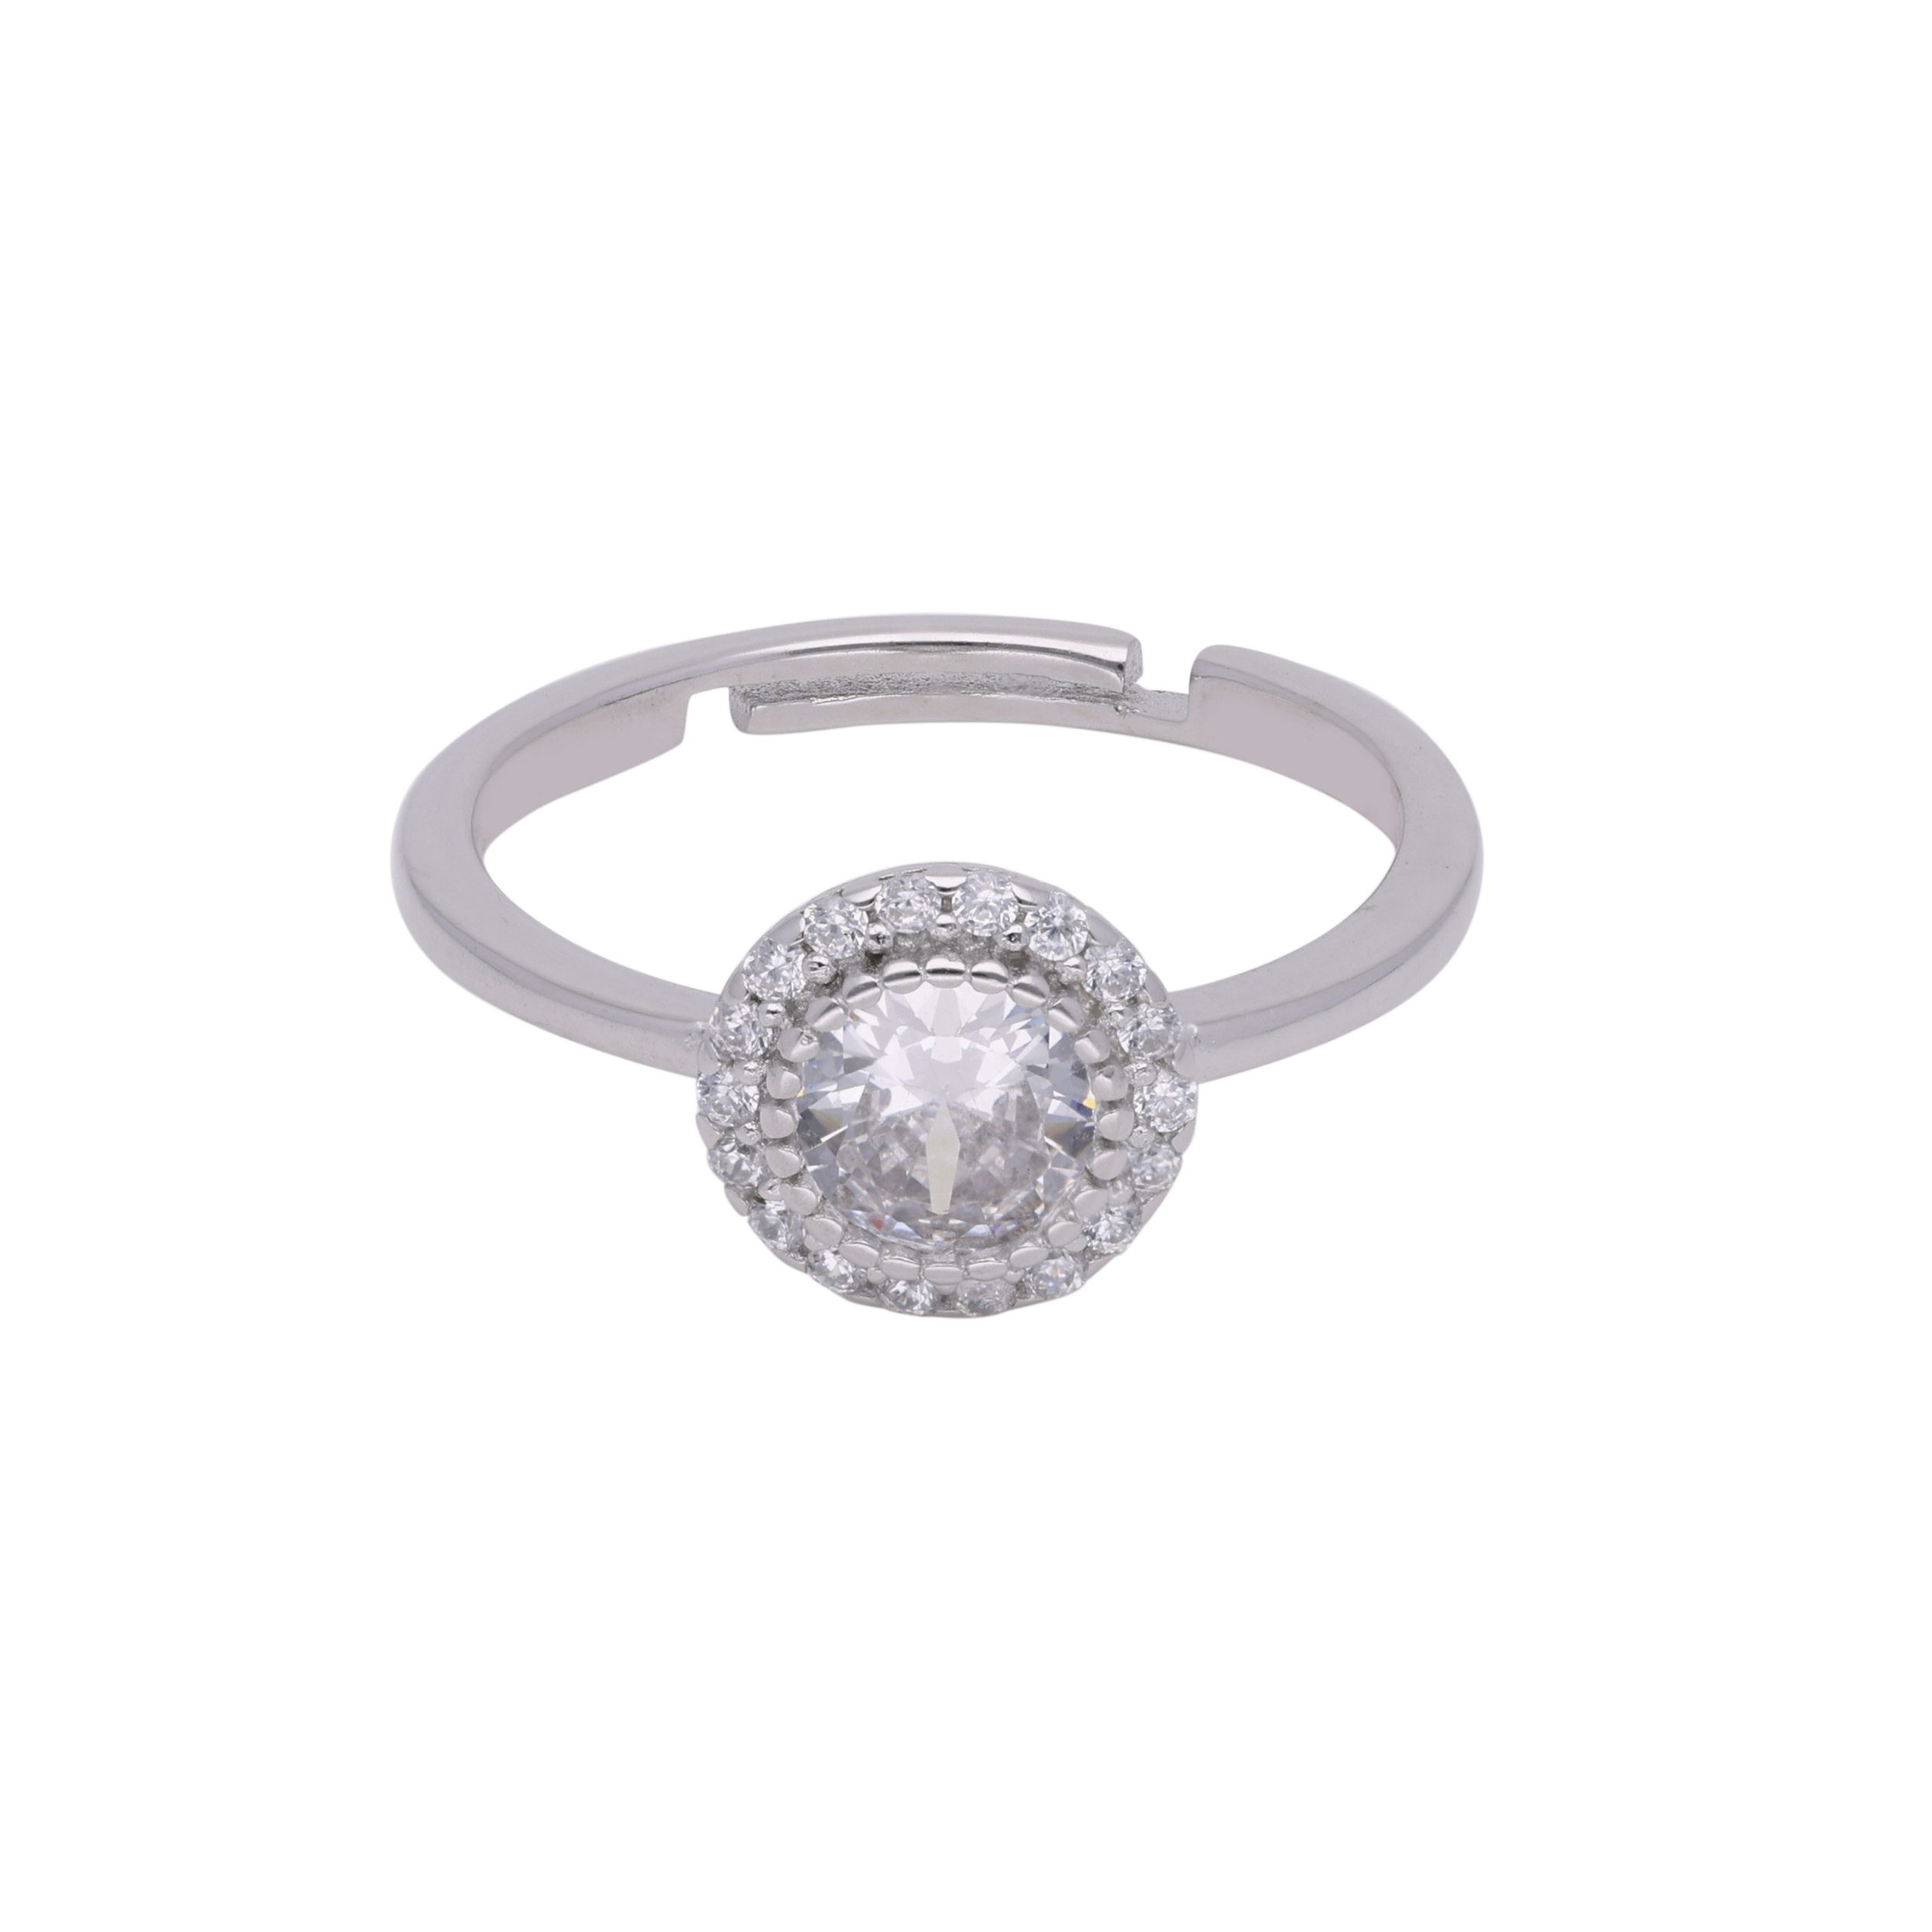 Timeless Sparkle: Sterling Silver Solitaire Ring | SKU : 0019883823